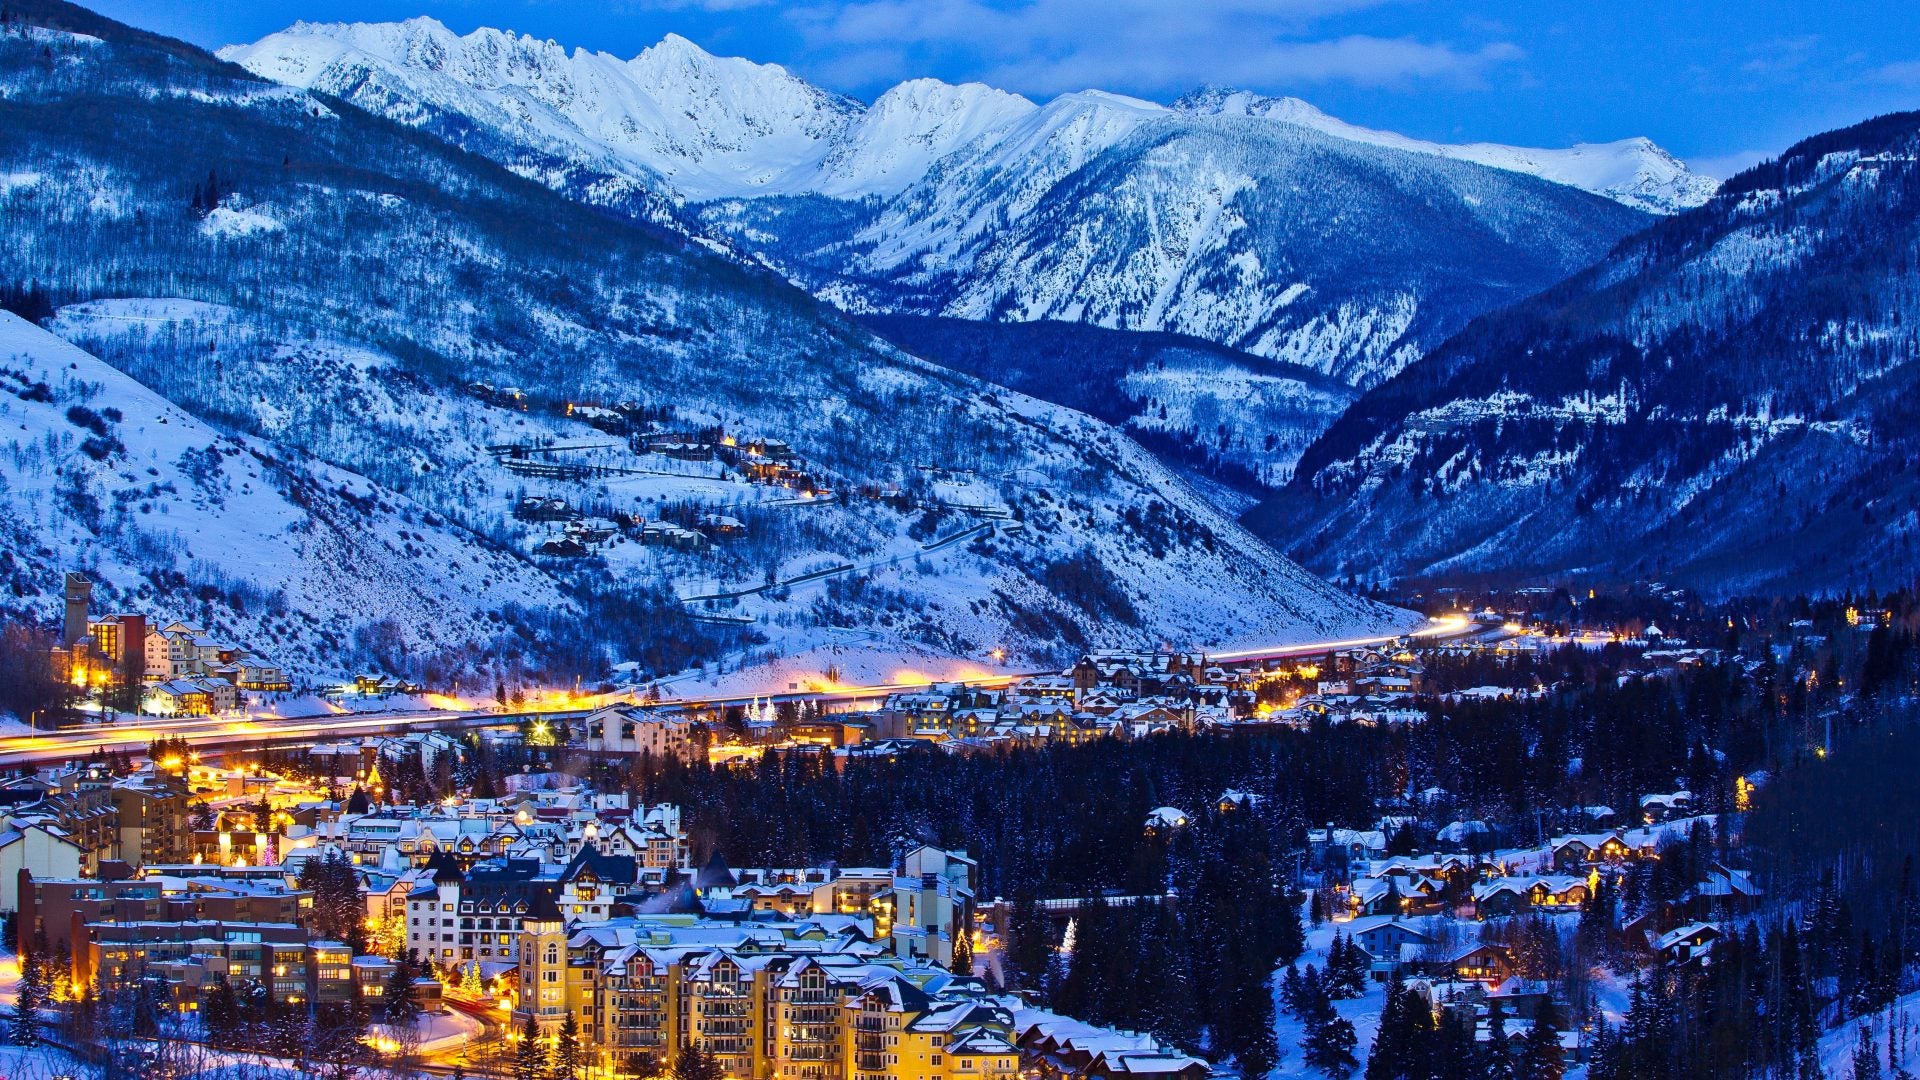 A Black Girl's Guide To Vail, Colorado's Alpine Village And Picturesque Ski Town